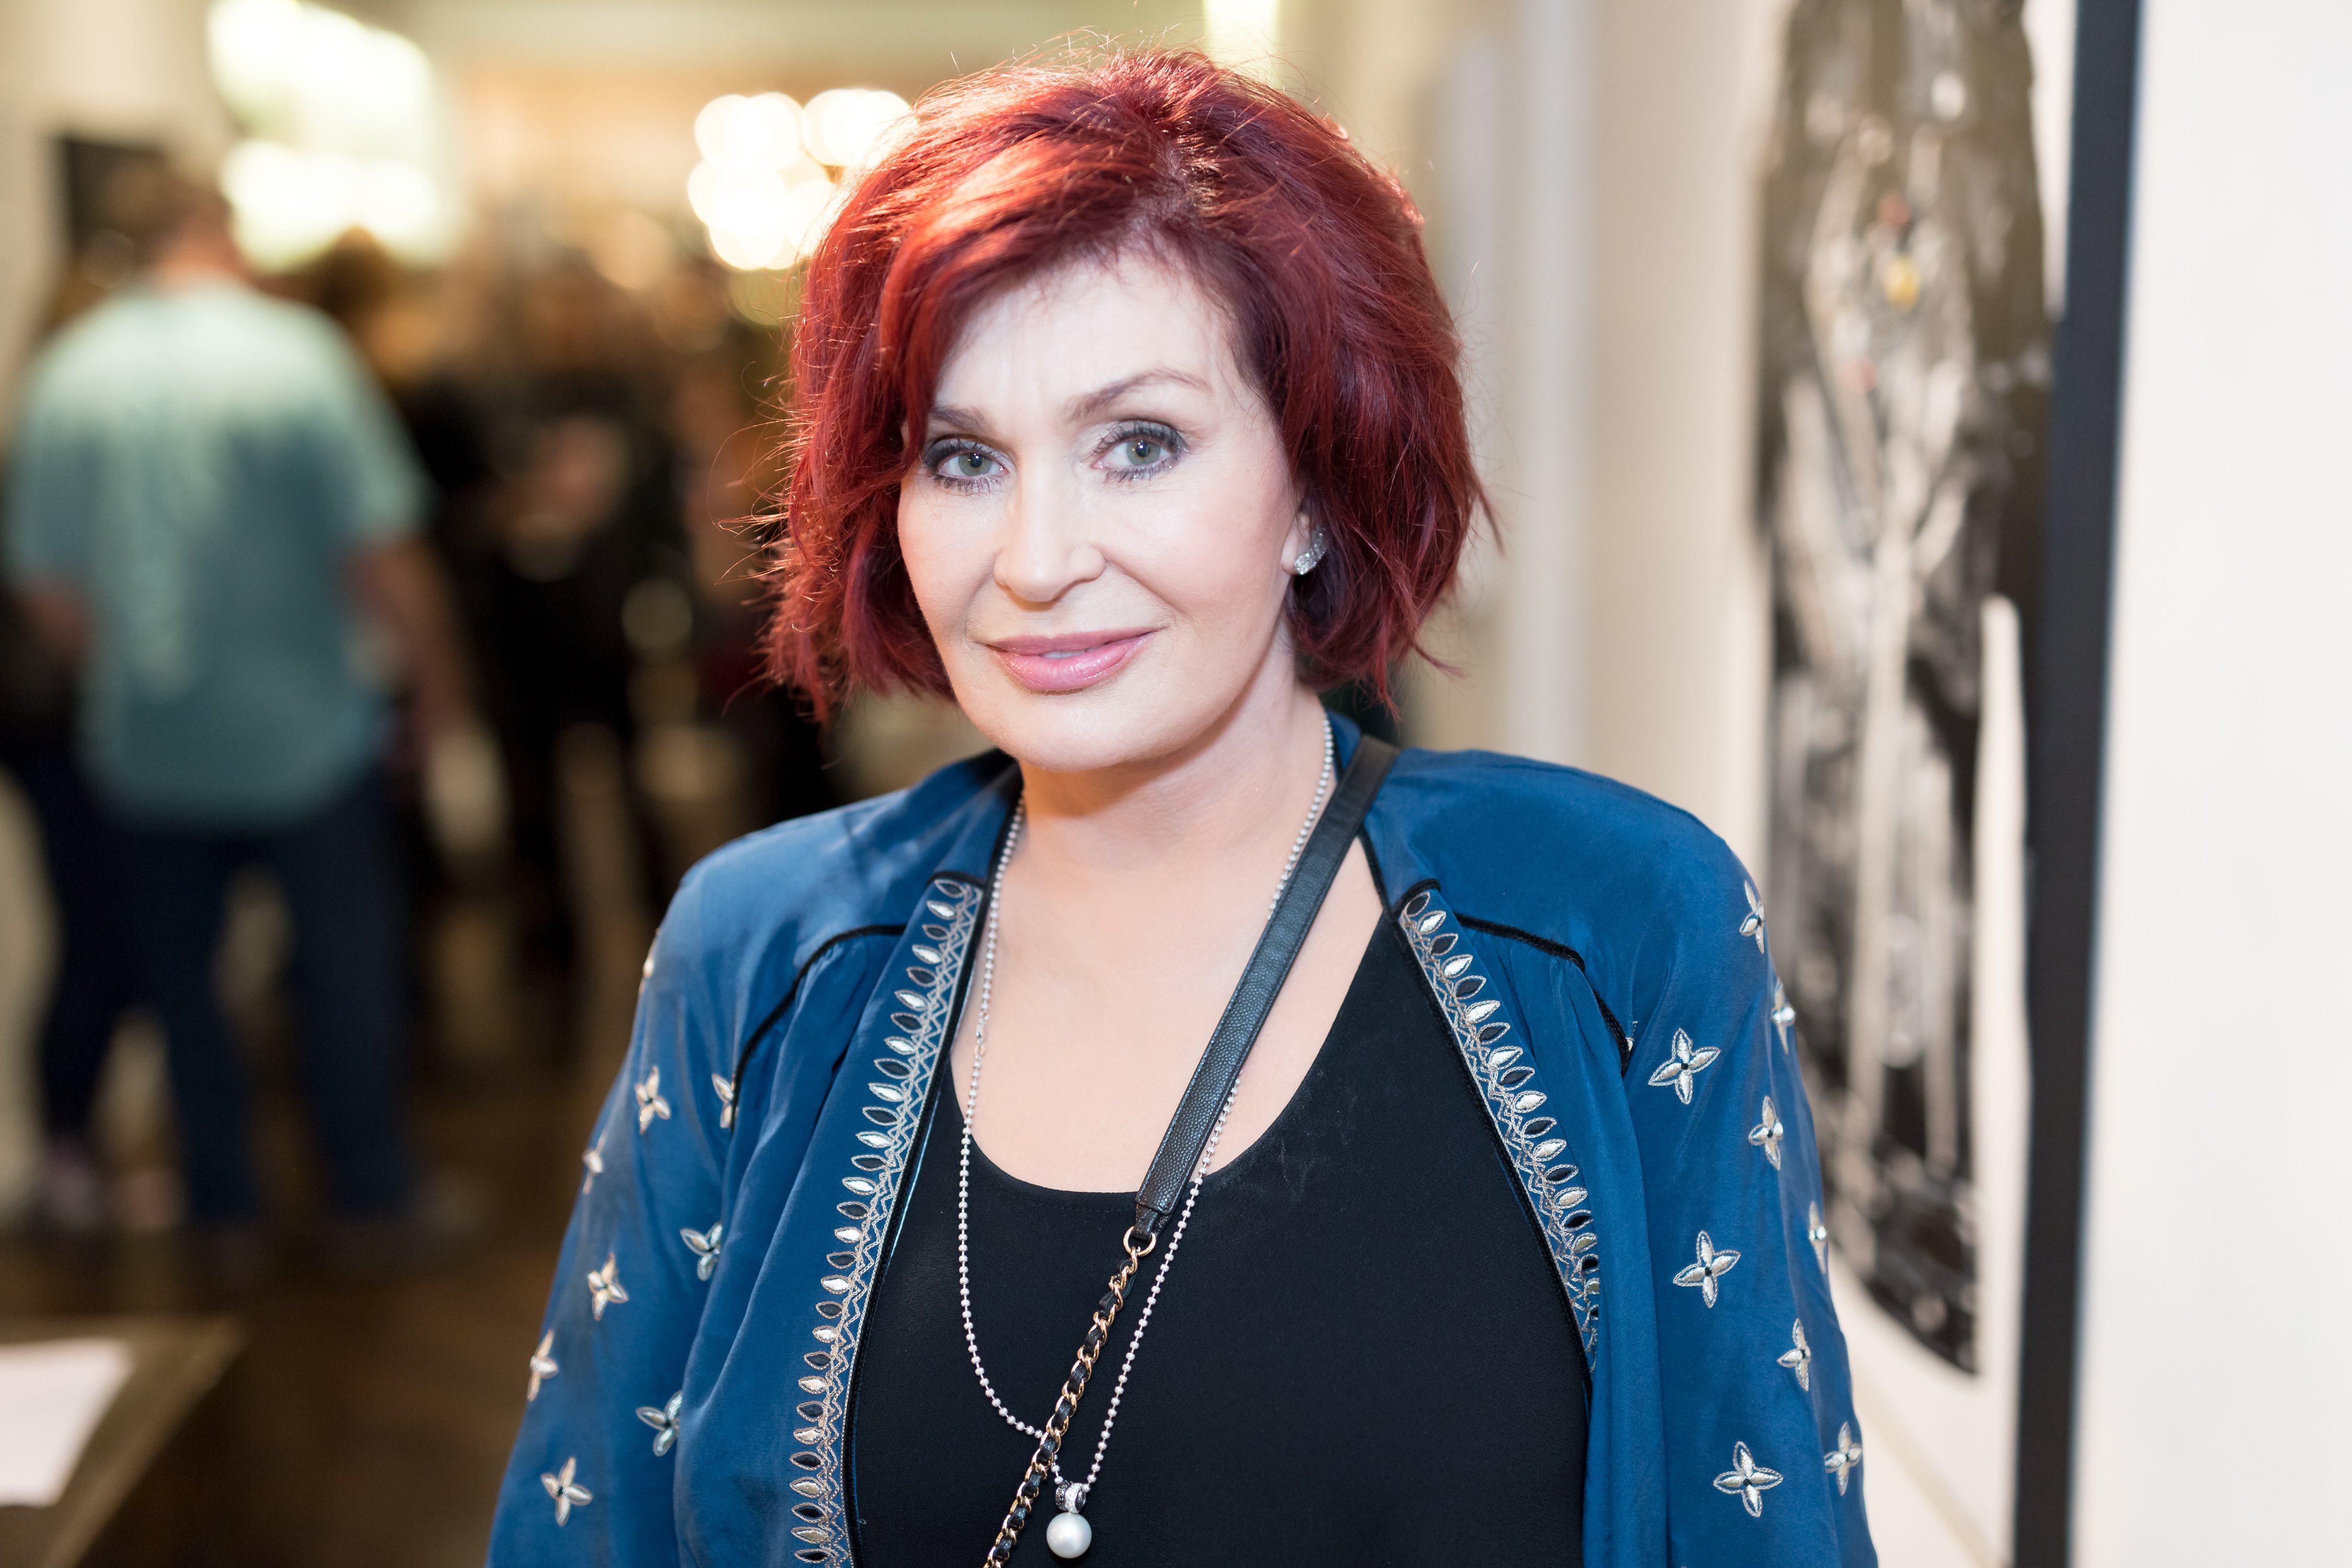 Sharon Osbourne attends the Billy Morrison - Aude Somnia Solo Exhibition on September 28, 2017, in Los Angeles, California. | Source: Getty Images.